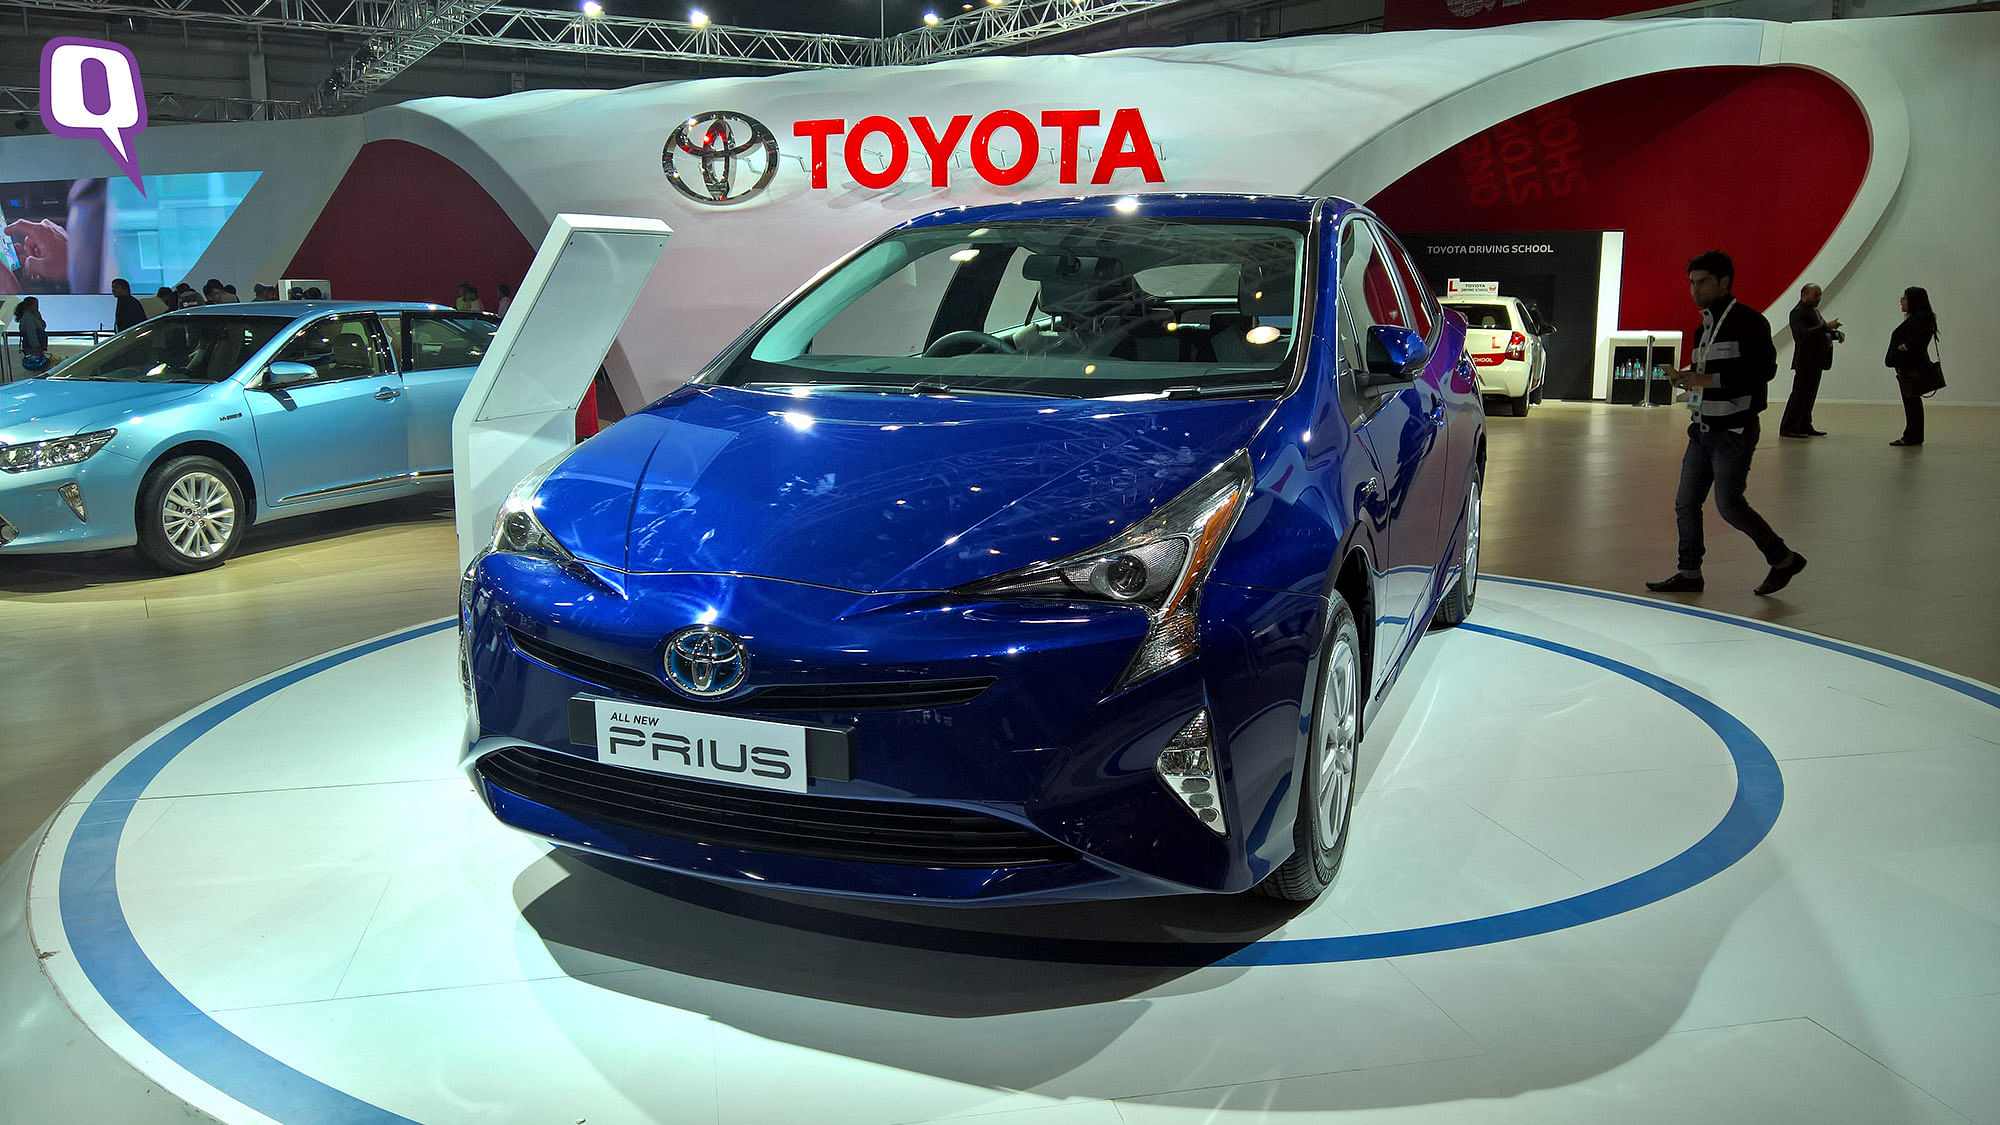 Toyota will supply its hybrid vehicle technology to Suzuki, while selling some Suzuki vehicles as Toyota branded ones.&nbsp;